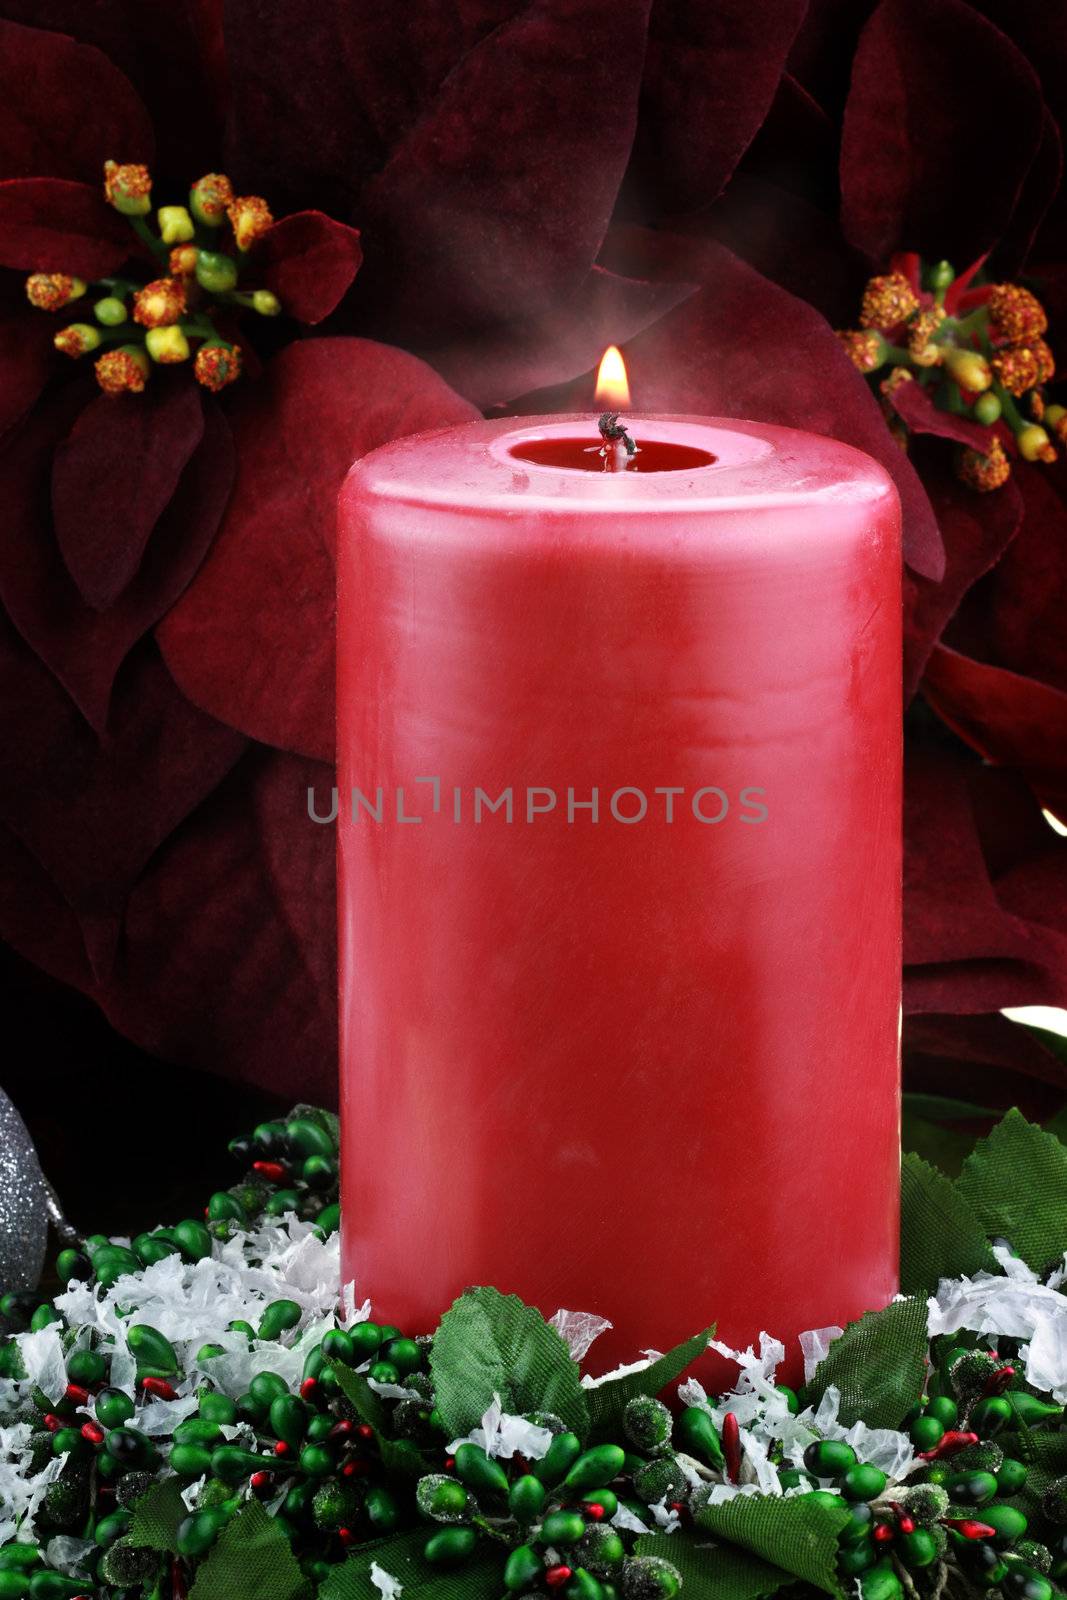 Lit Christmas Candle and Poinsettias by StephanieFrey